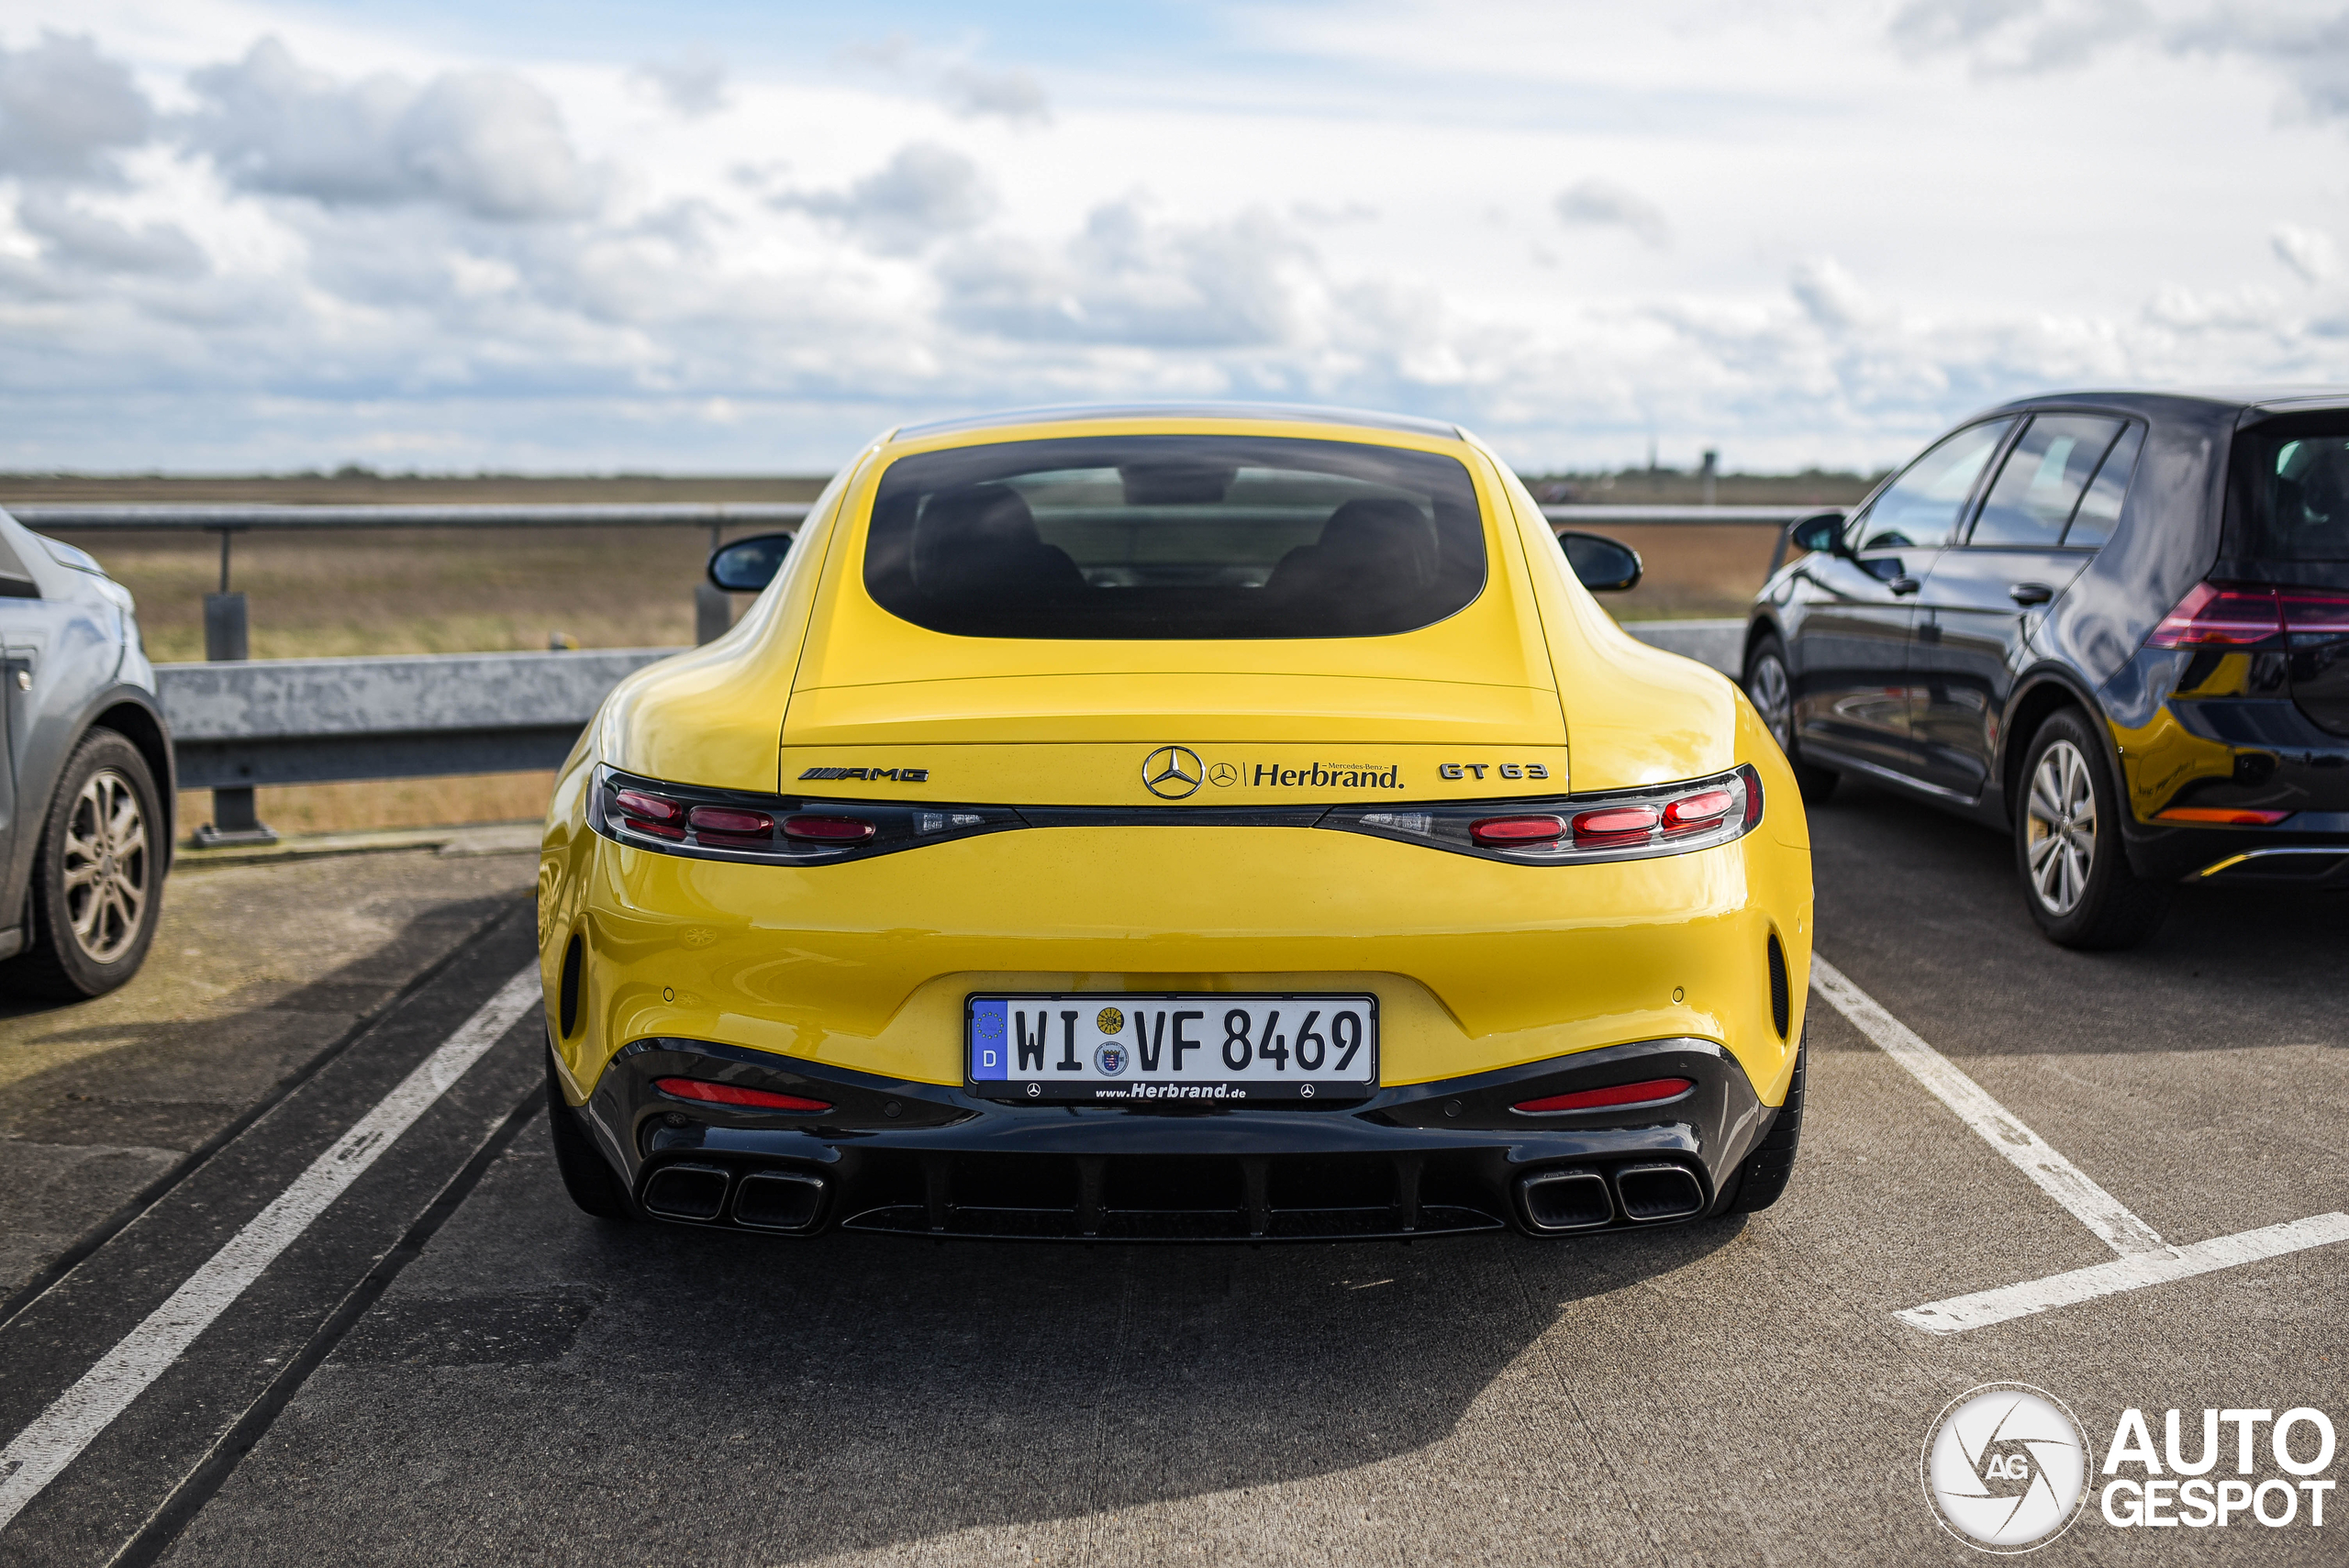 Debating the evolution: Mercedes-AMG's strategy with the new AMG GT